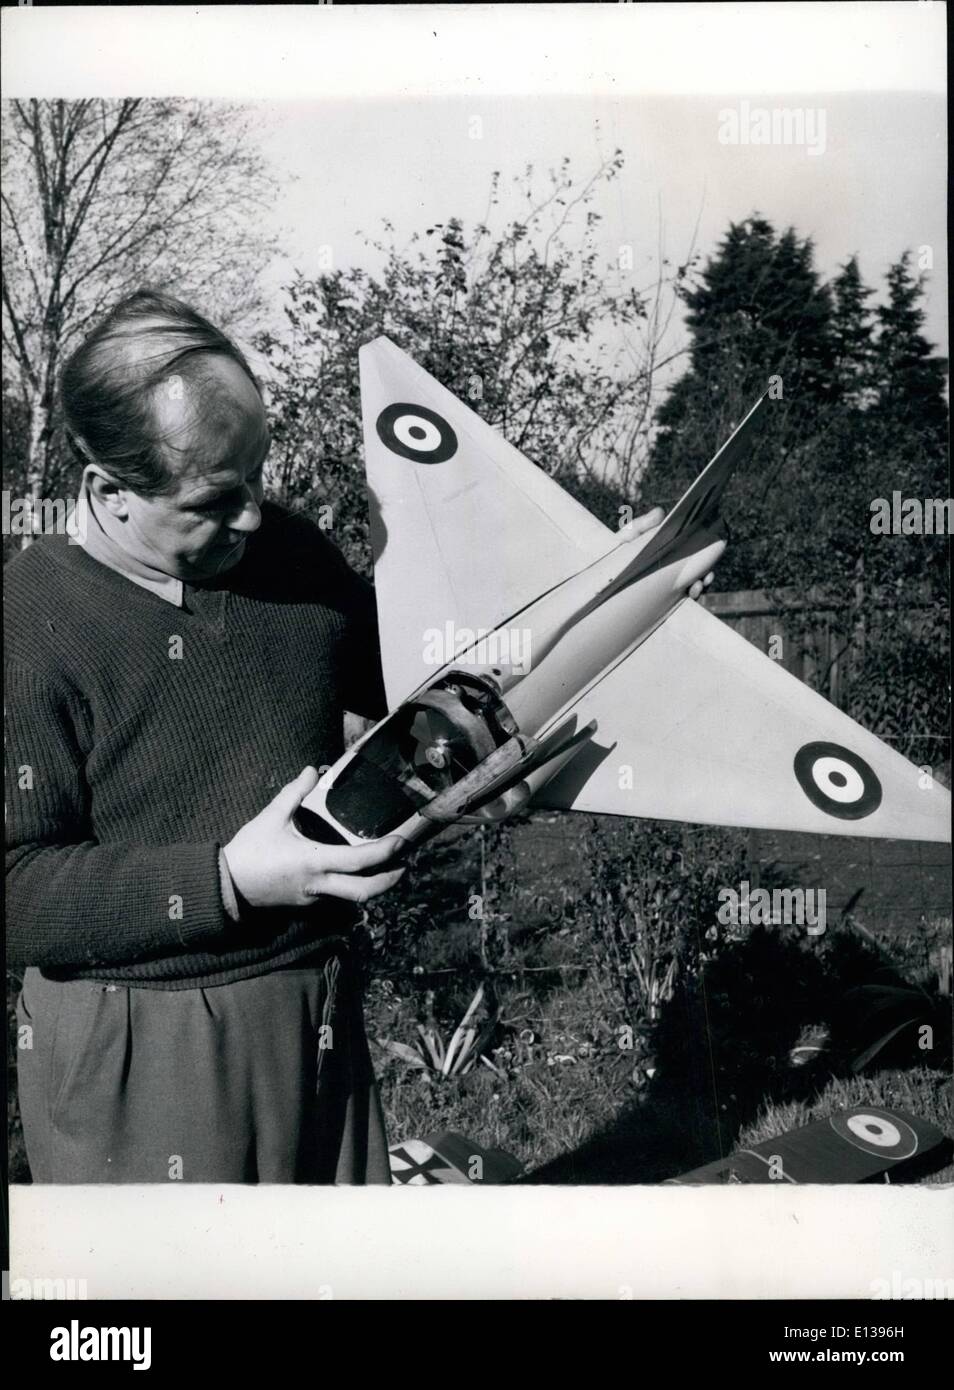 Feb. 29, 2012 - An Art Master Who ''Commands'' His Self-Made Air Force: A perfect, flying, model of a Delta wing Boulton Paul III ducted fan driven fighter in the hands of its maker, Mr. Edward Norman, art master at Maidstone, who lives at Banstead Surrey. It is one of a fleet of 60 scale models of fighter planes of every type flown by the Air Force down the years from the first world war. Stock Photo